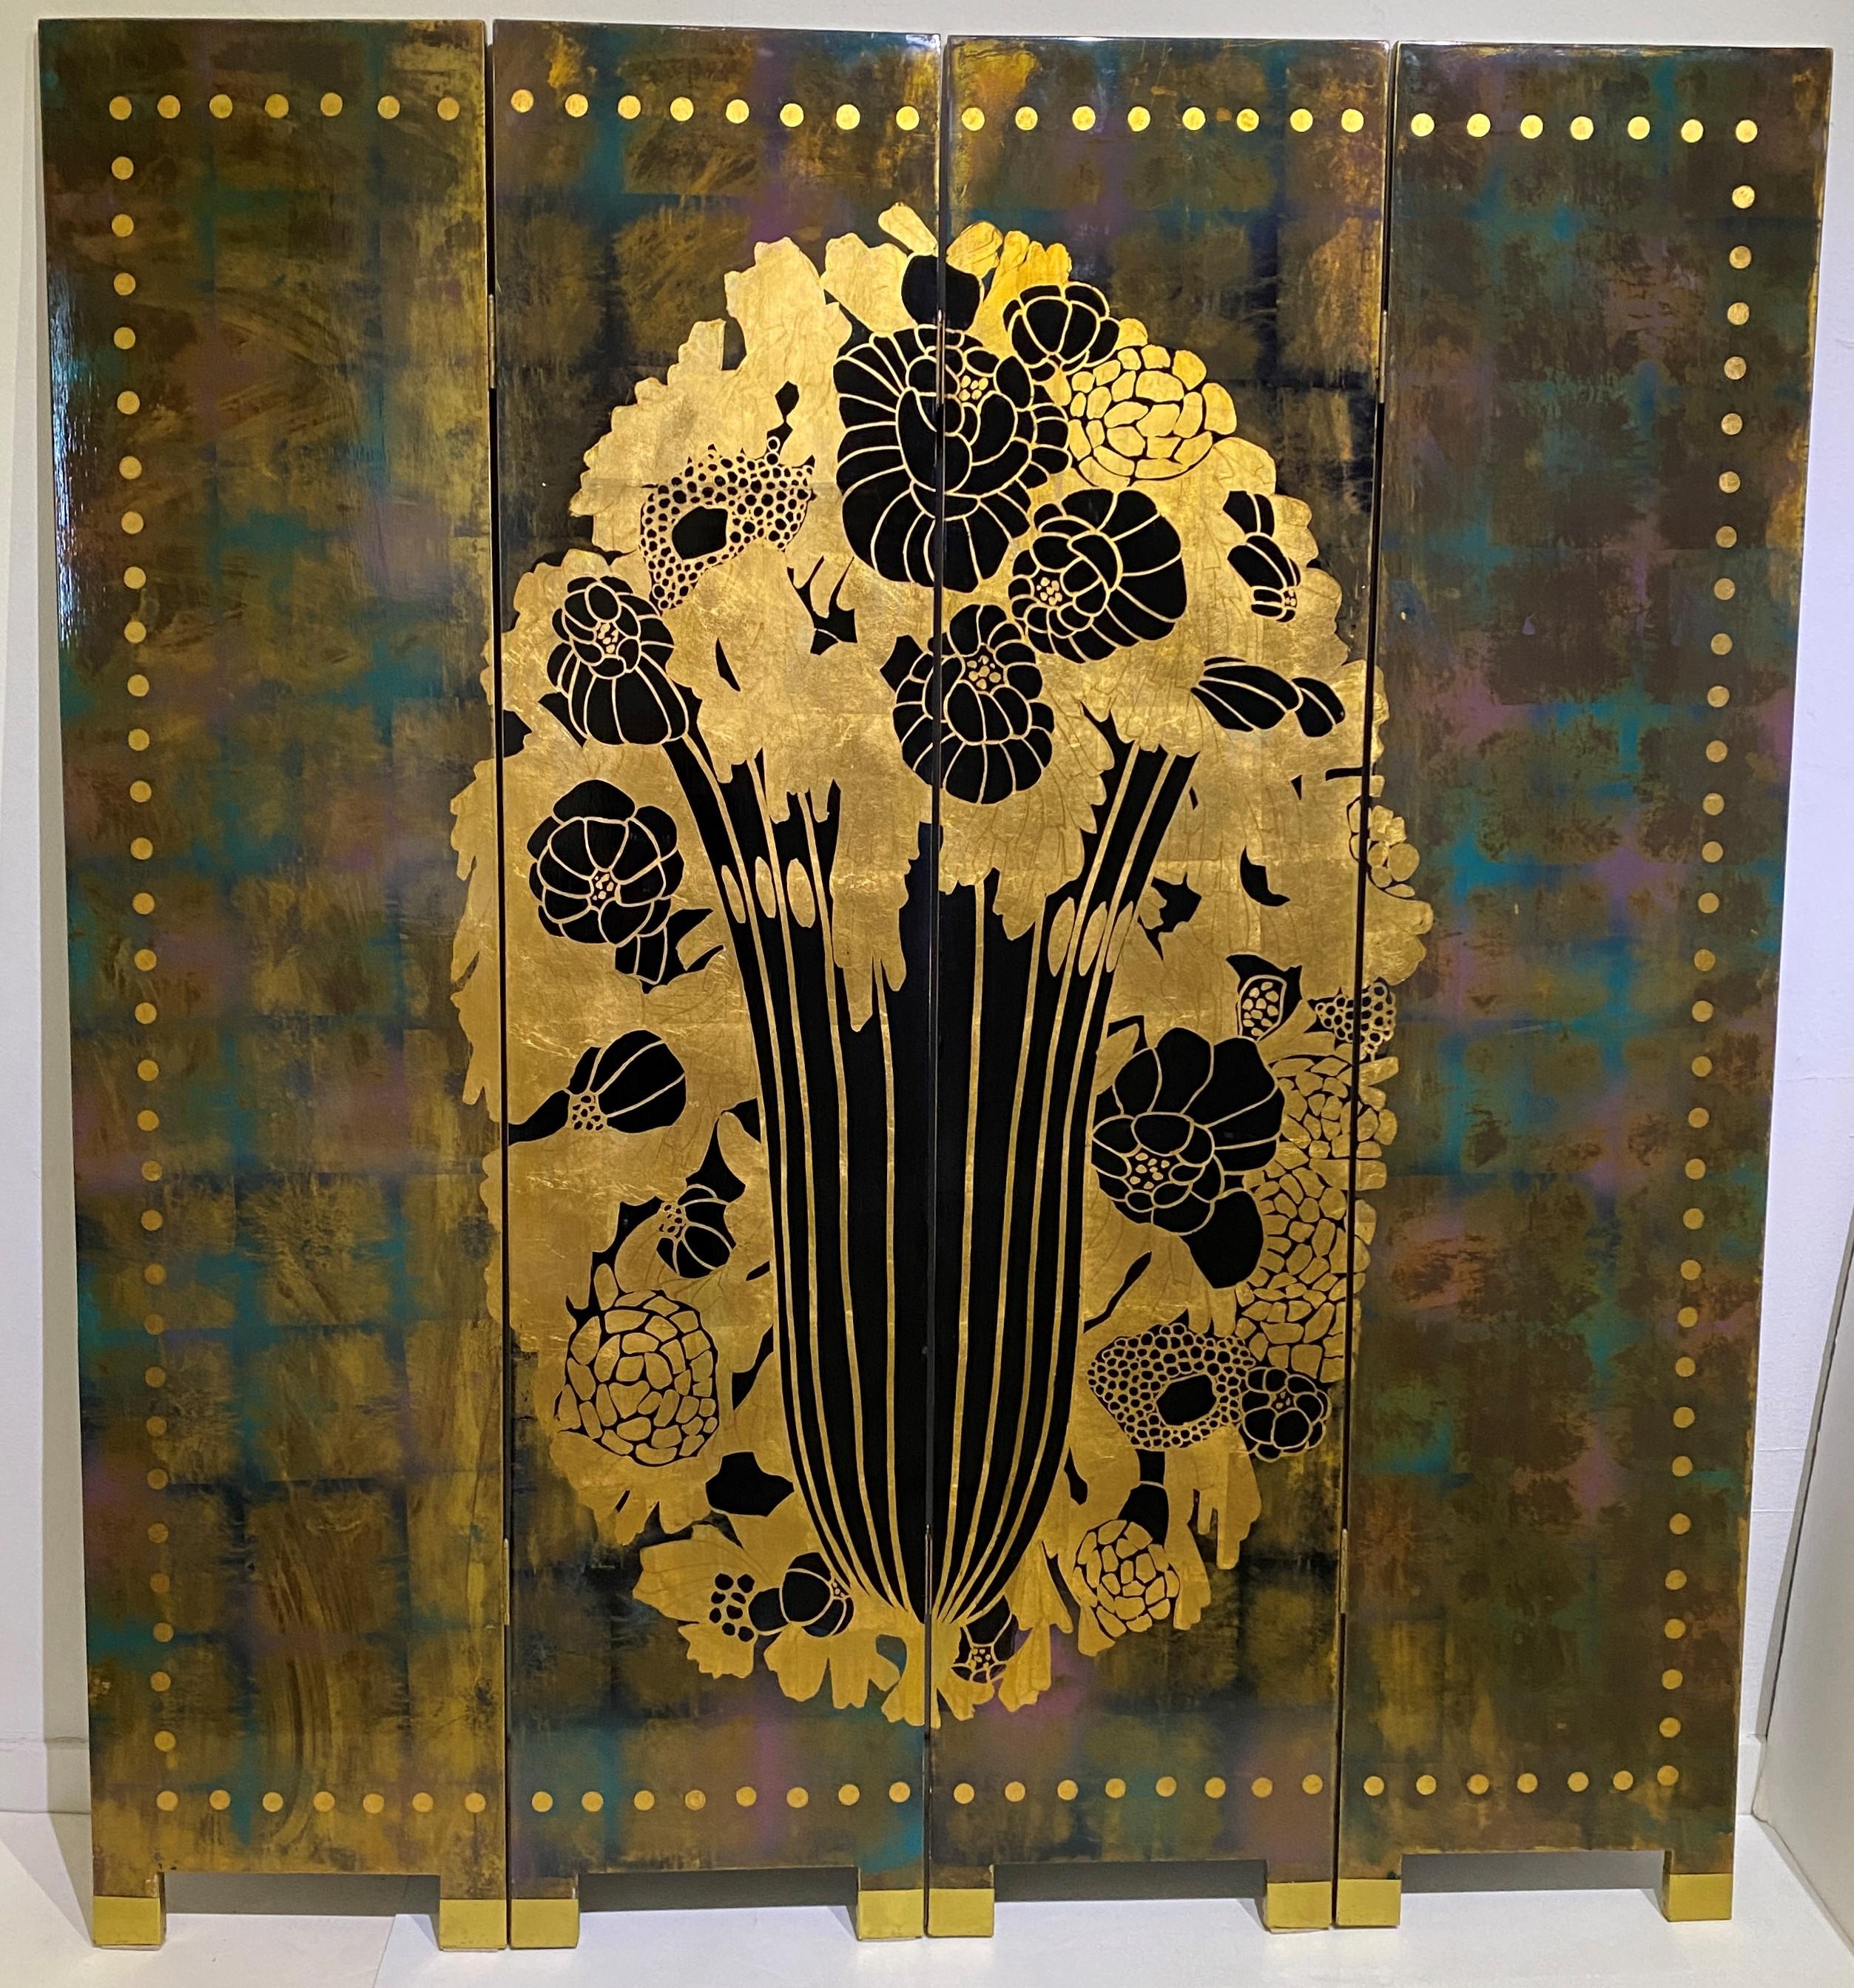 This stylish and chic Art Deco style lacquered,four panel folding screen has taken its inspiration from a cabinet designed by Emile Jacques Ruhlmann (see last image).

Note: The backside of the screen is a black lacquer with gold colored images of